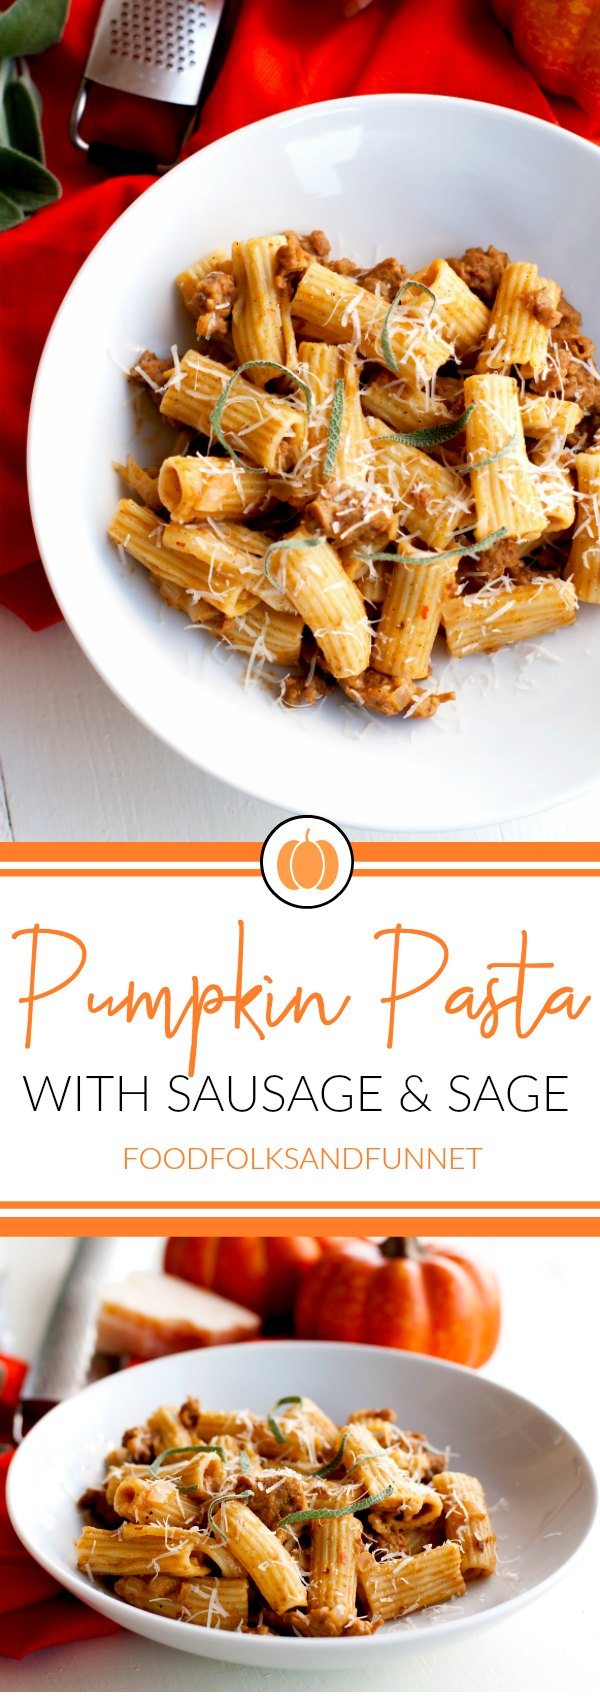 A collage of pumpkin pasta with sausage and sage with text overlay for Pinterest